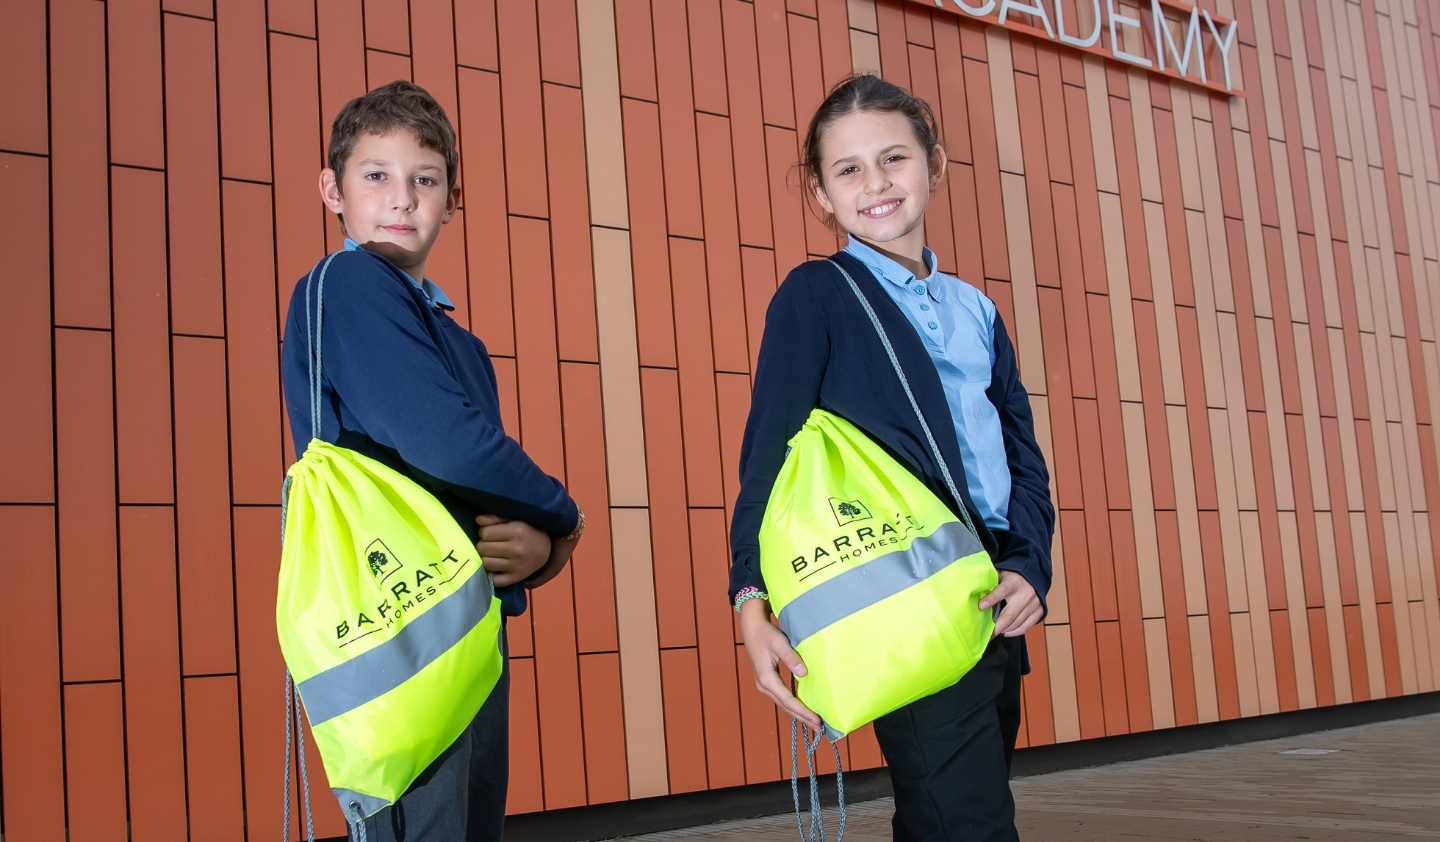 Two pupils at Wintringham Primary Academy with the kit bags donated by Barratt Homes